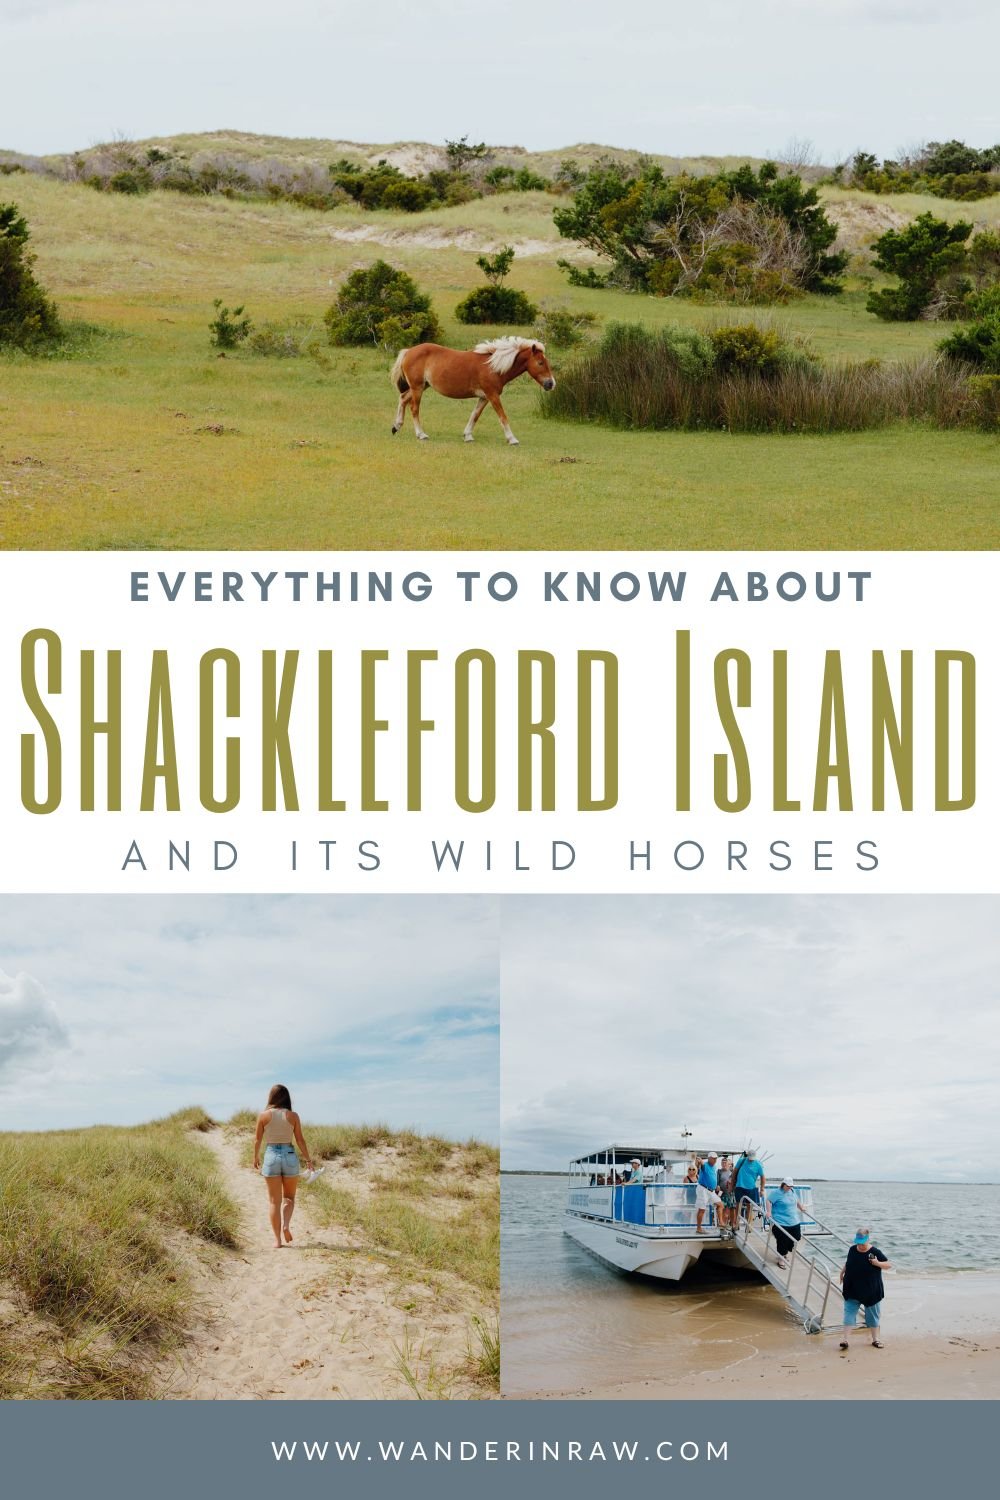 Shackleford Island Has Wild Horses! Here’s How to Find Them